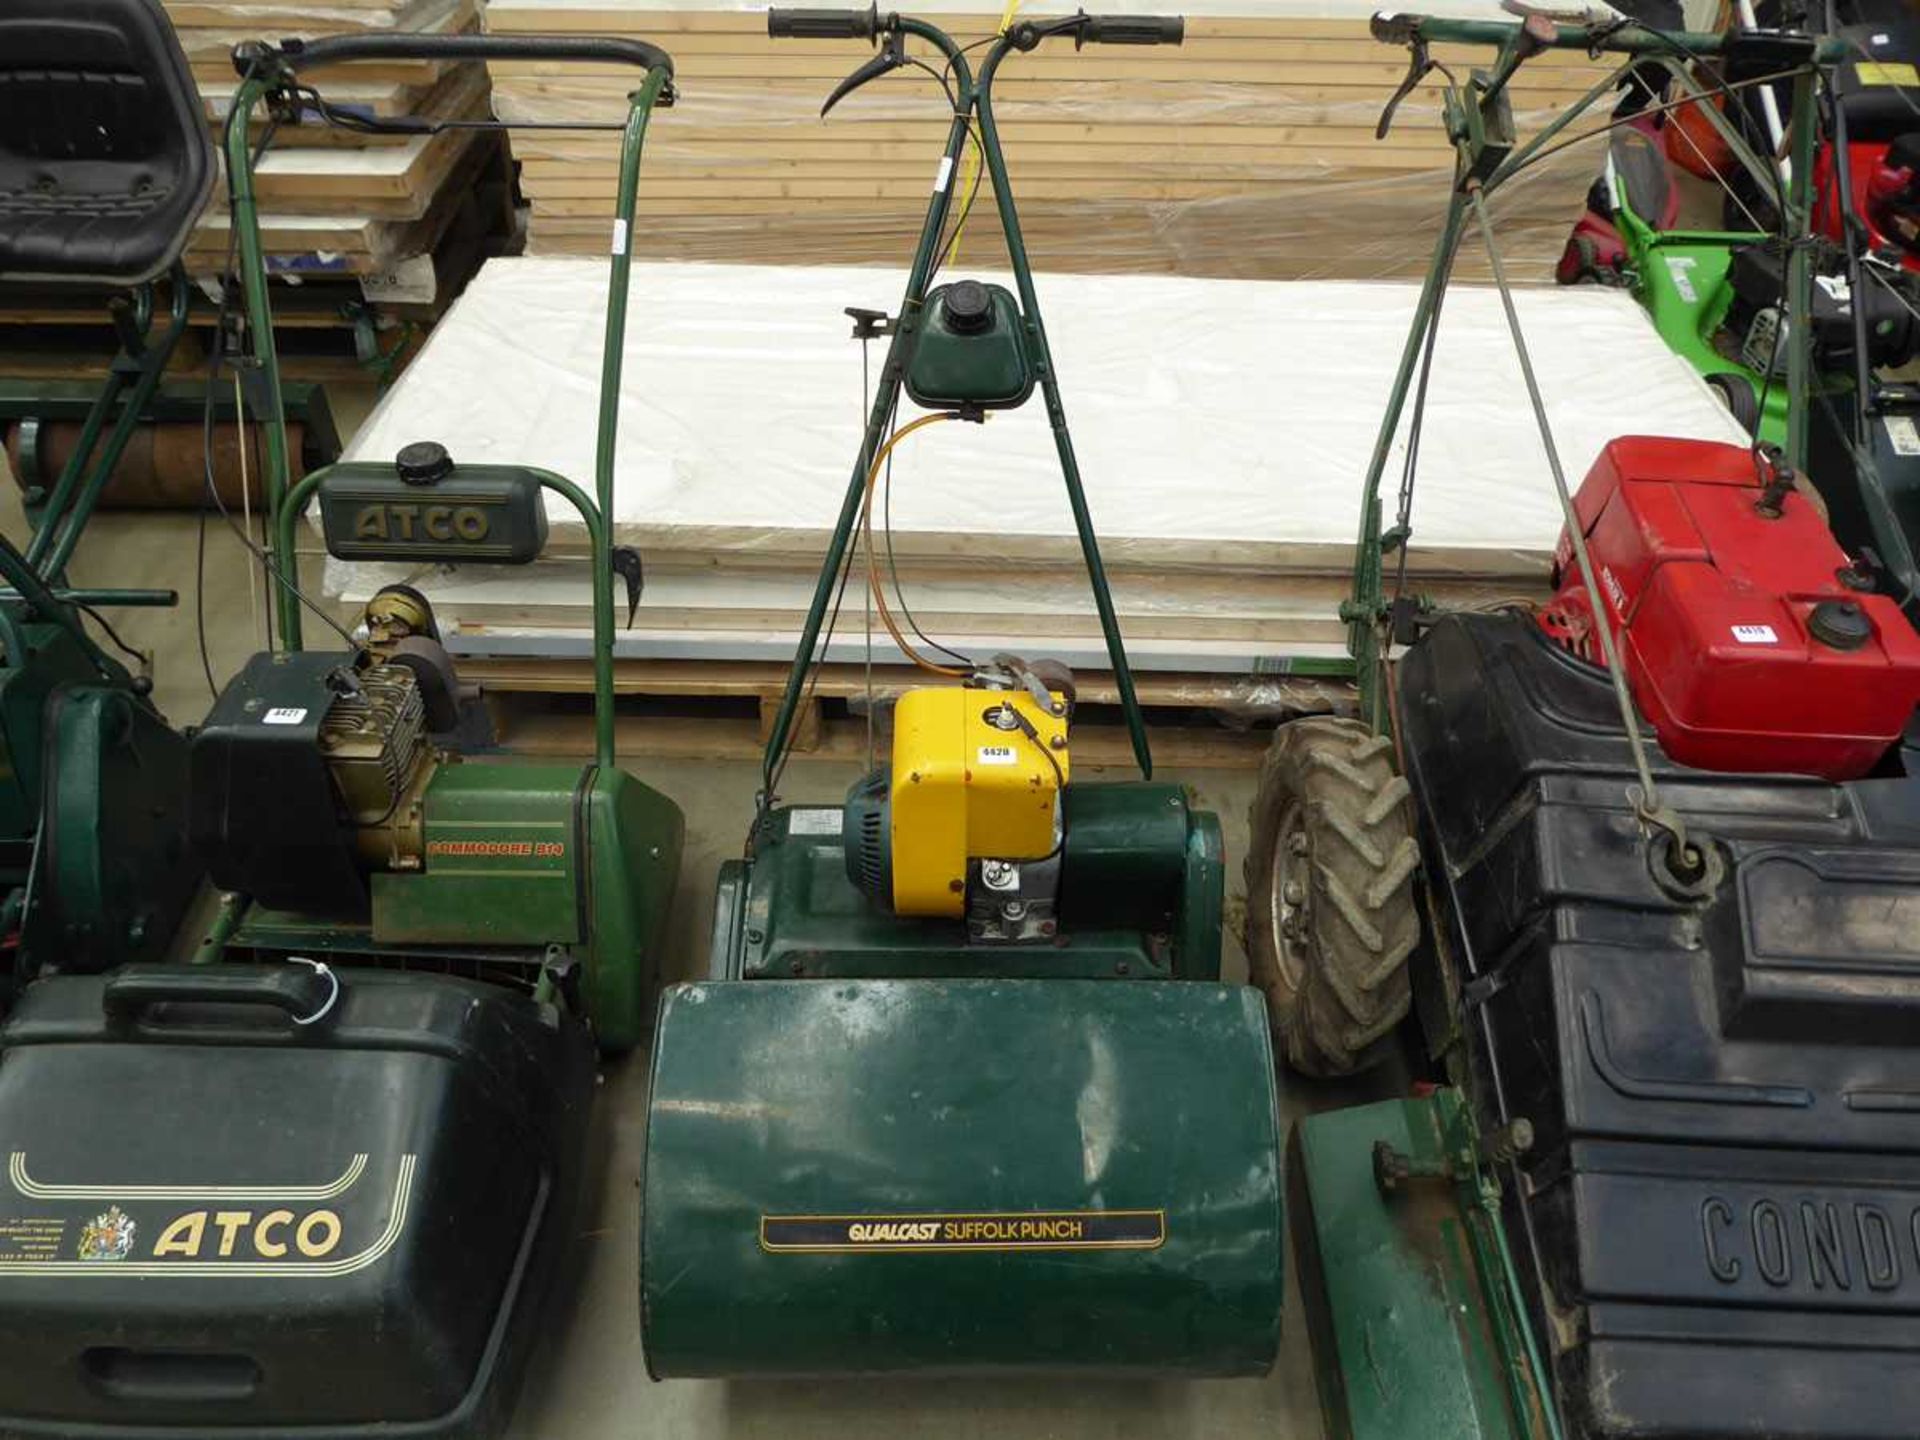 Qualcast suffolk punch petrol powered cylinder mower with grass box